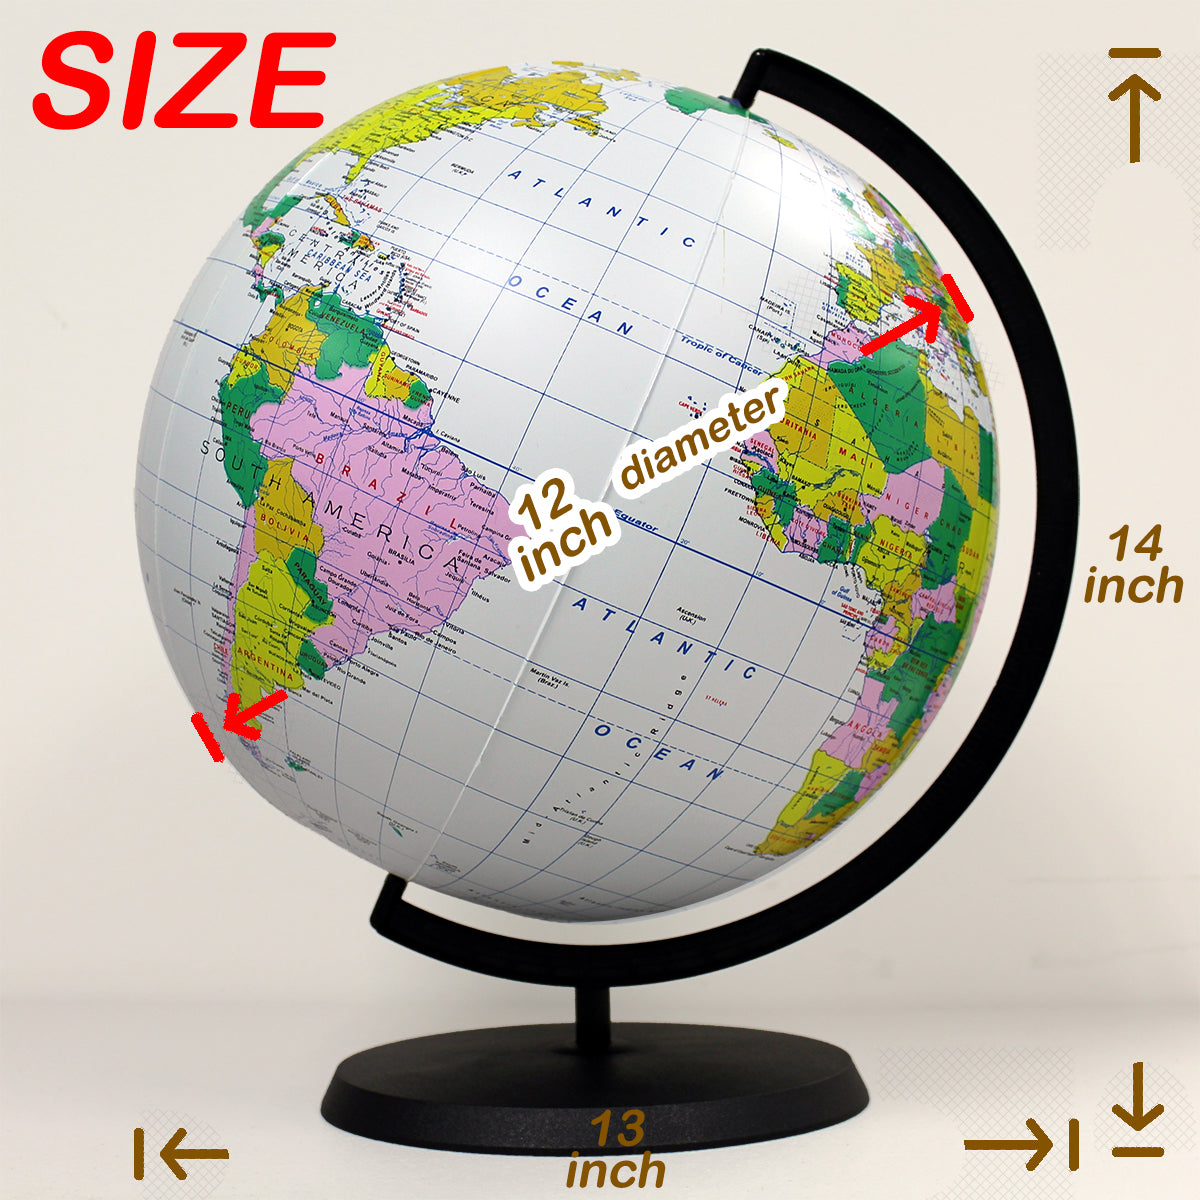 Inflatable Deluxe Inflatable Desktop Globe with stand, 12 inch [GTO-12GOBX], Jet Creations